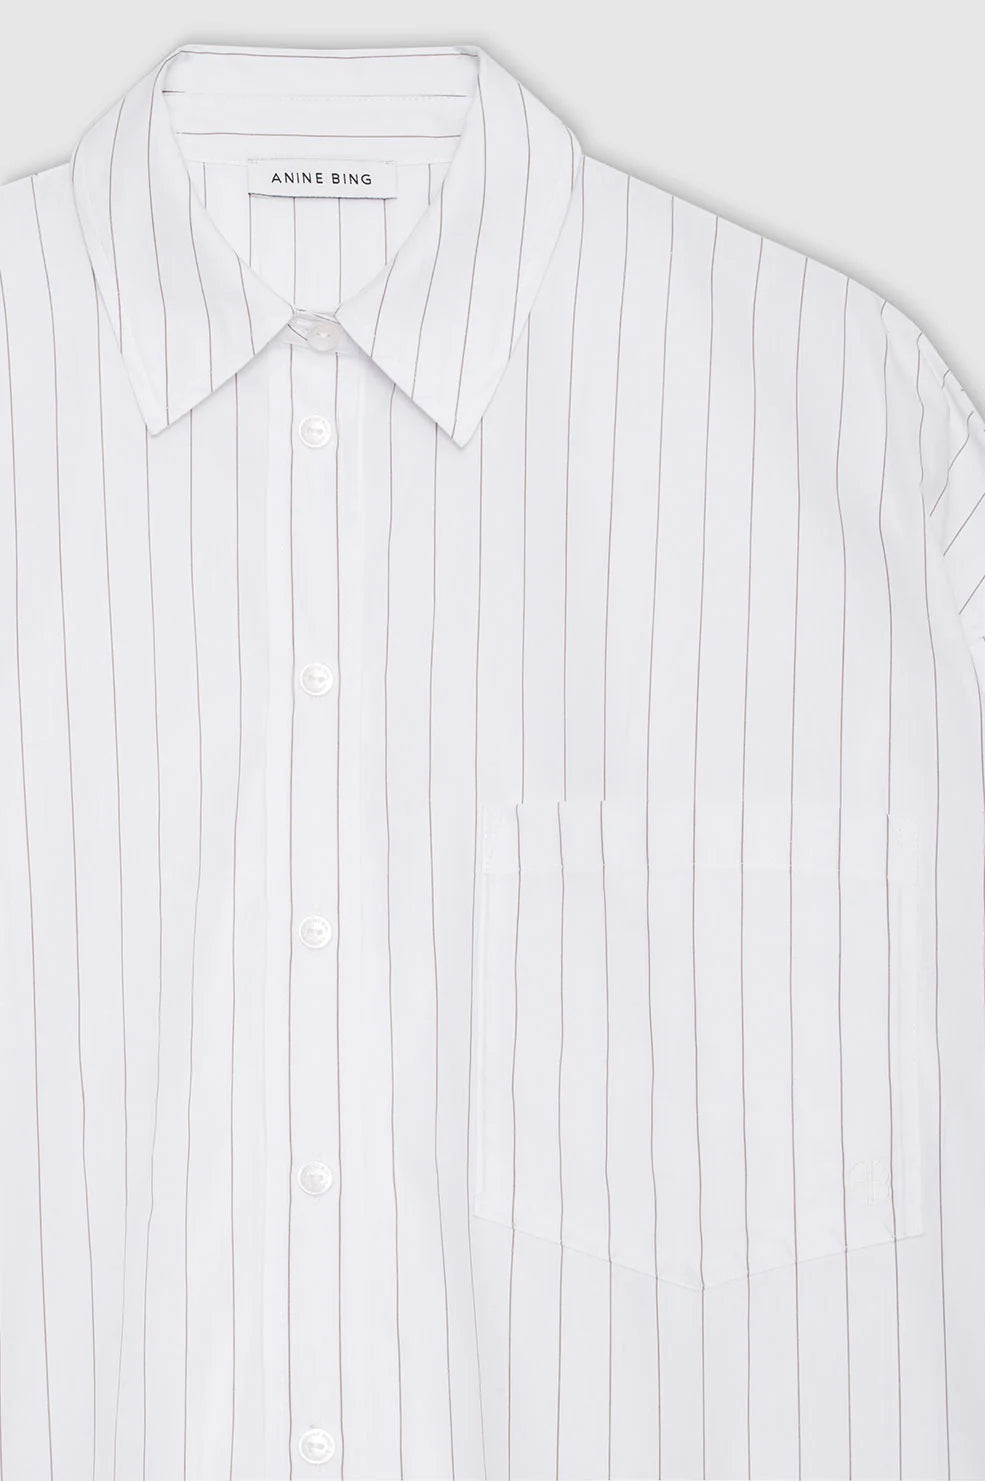 ANINE BING - CHRISSY SHIRT - WHITE AND TAUPE STRIPE